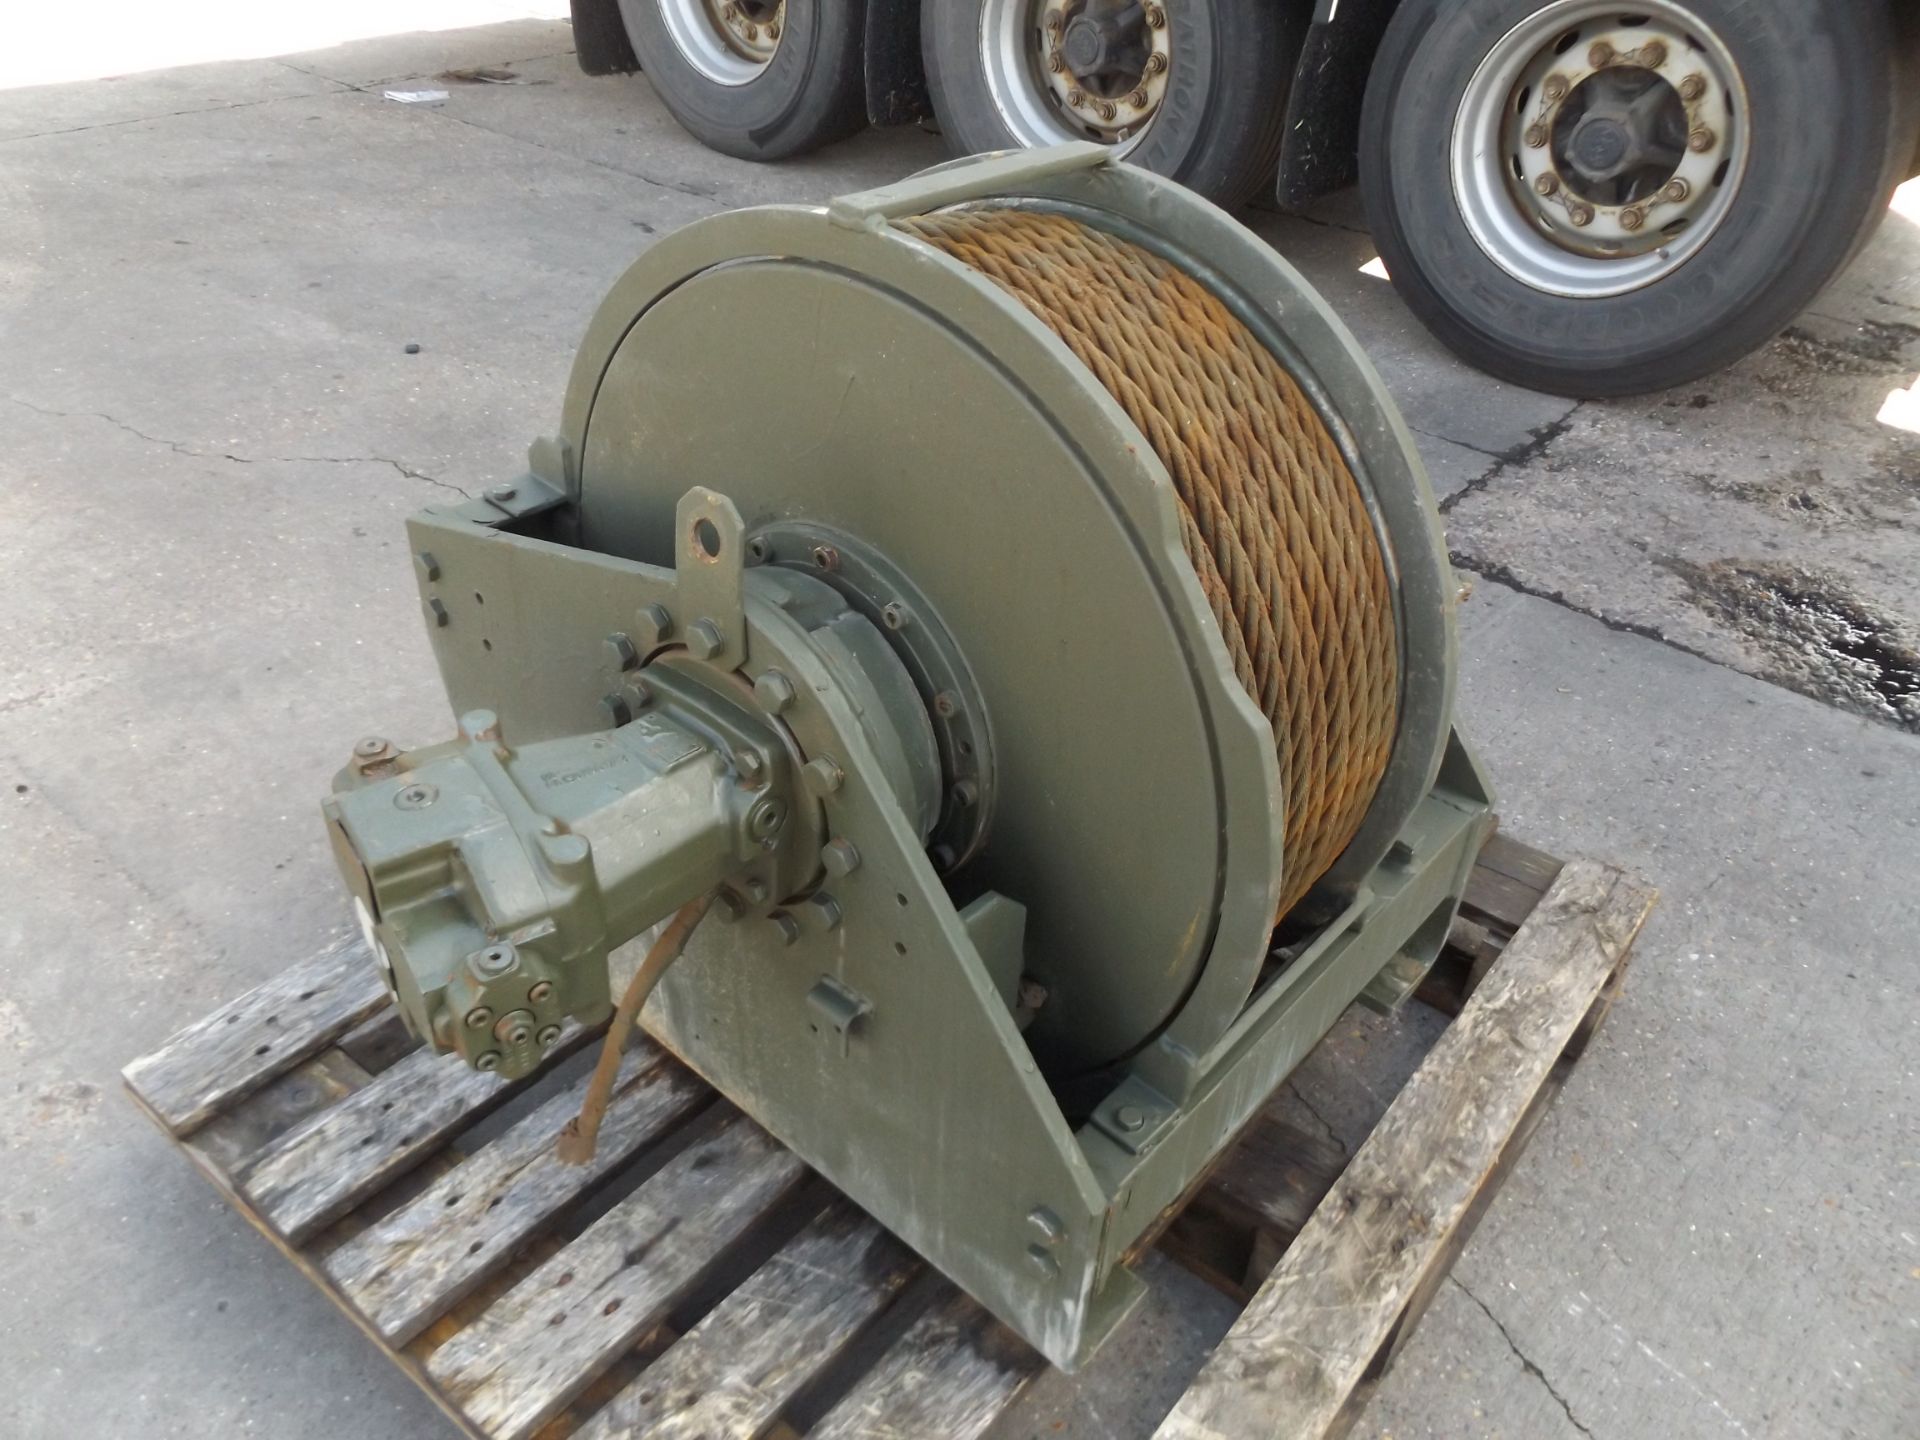 Rotzler 25 Ton Foden 6x6 Recovery Vehicle Mounted Hydraulic Winch - Image 2 of 8